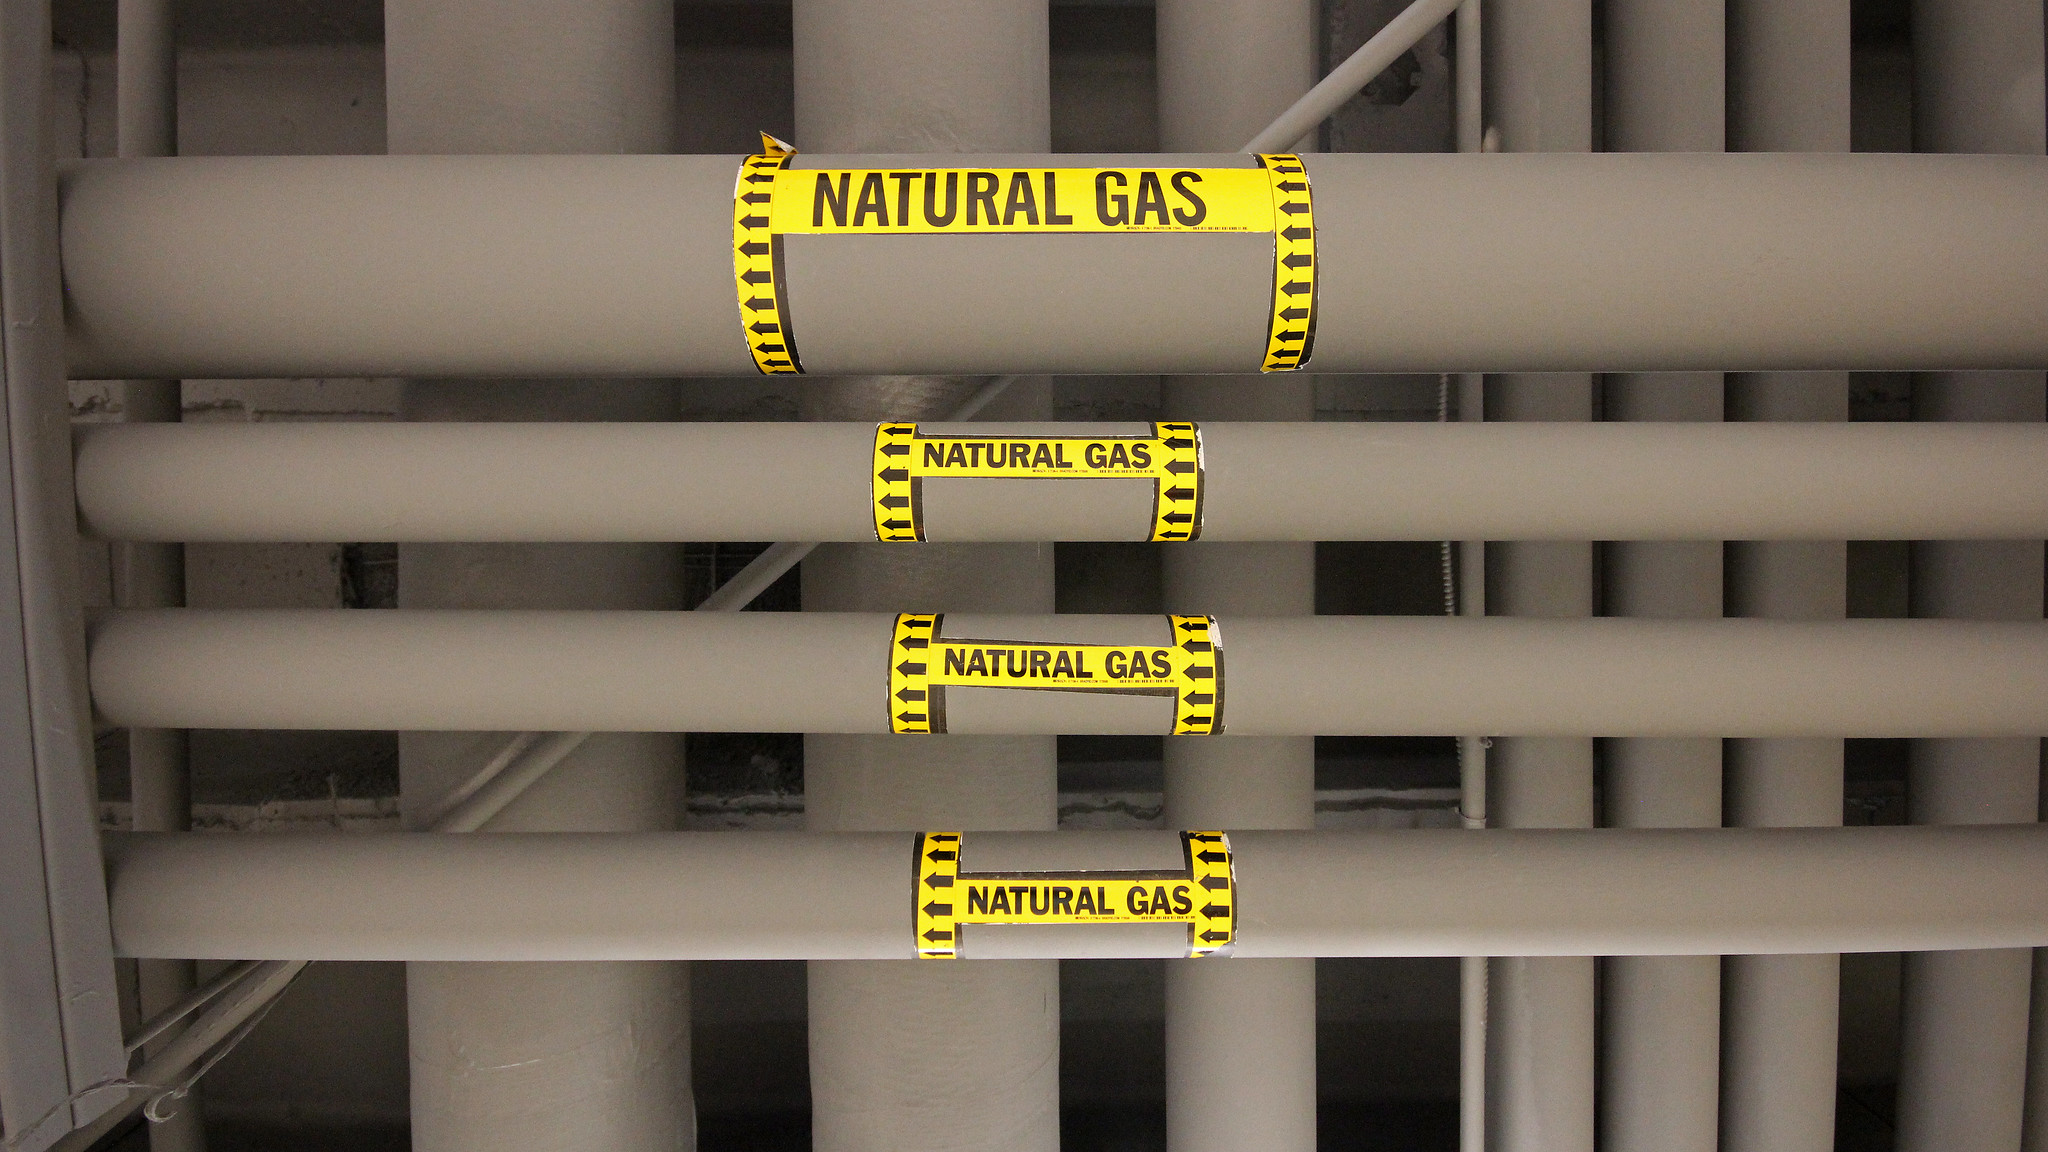 Natural gas pipes in a parking garage in Rivercenter Mall in San Antonio